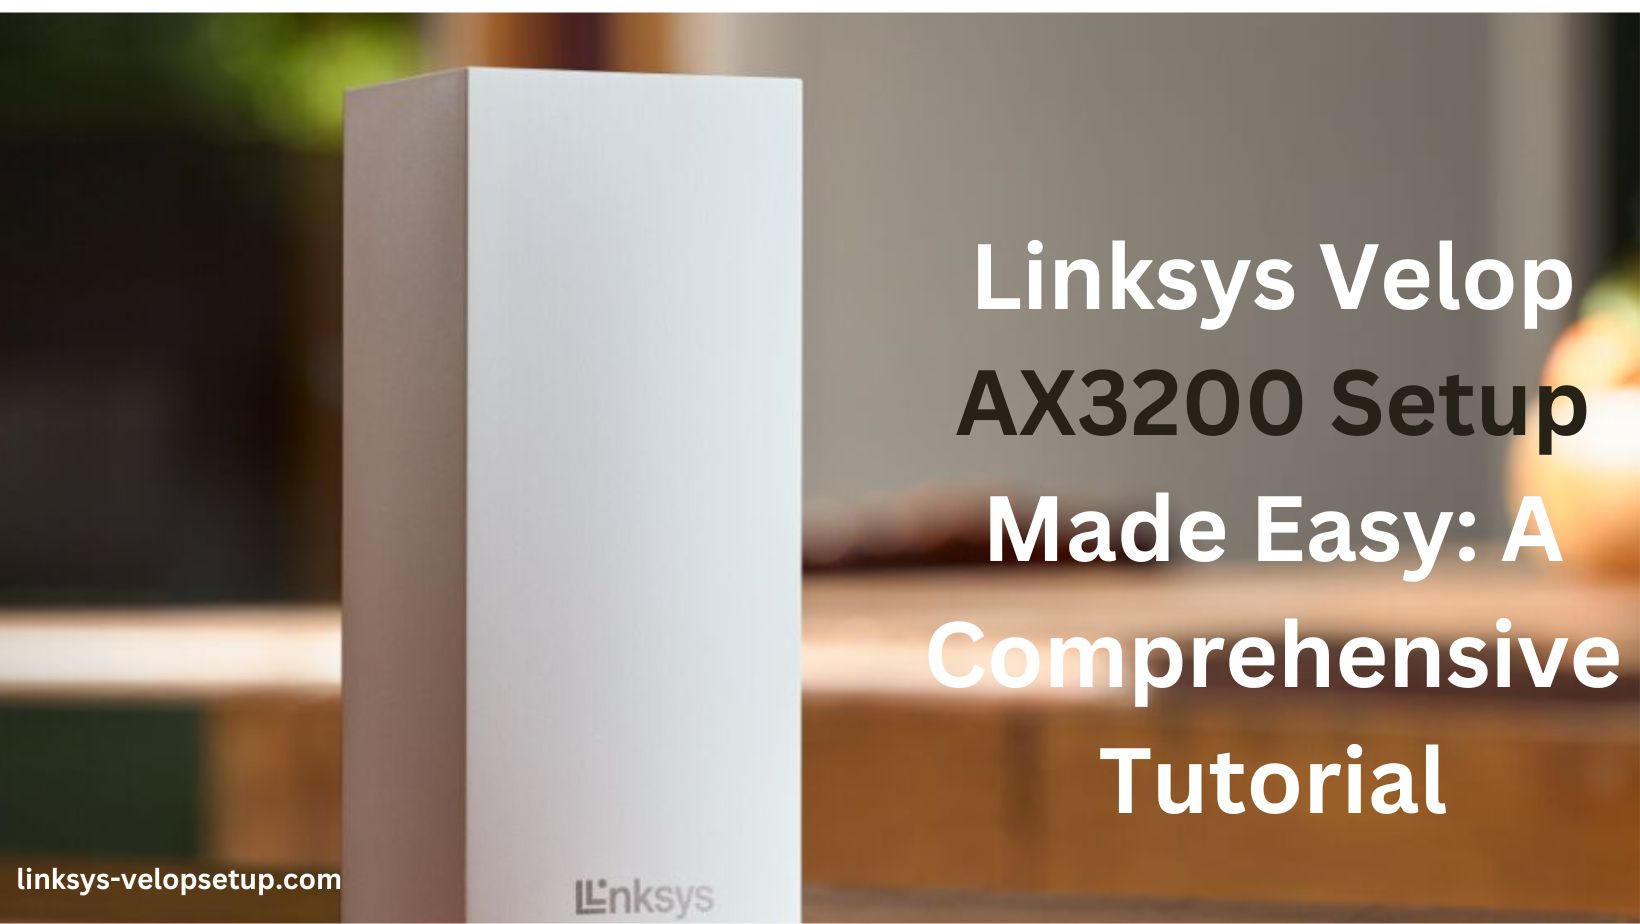 You are currently viewing Linksys Velop AX3200 Setup Made Easy: A Comprehensive Tutorial